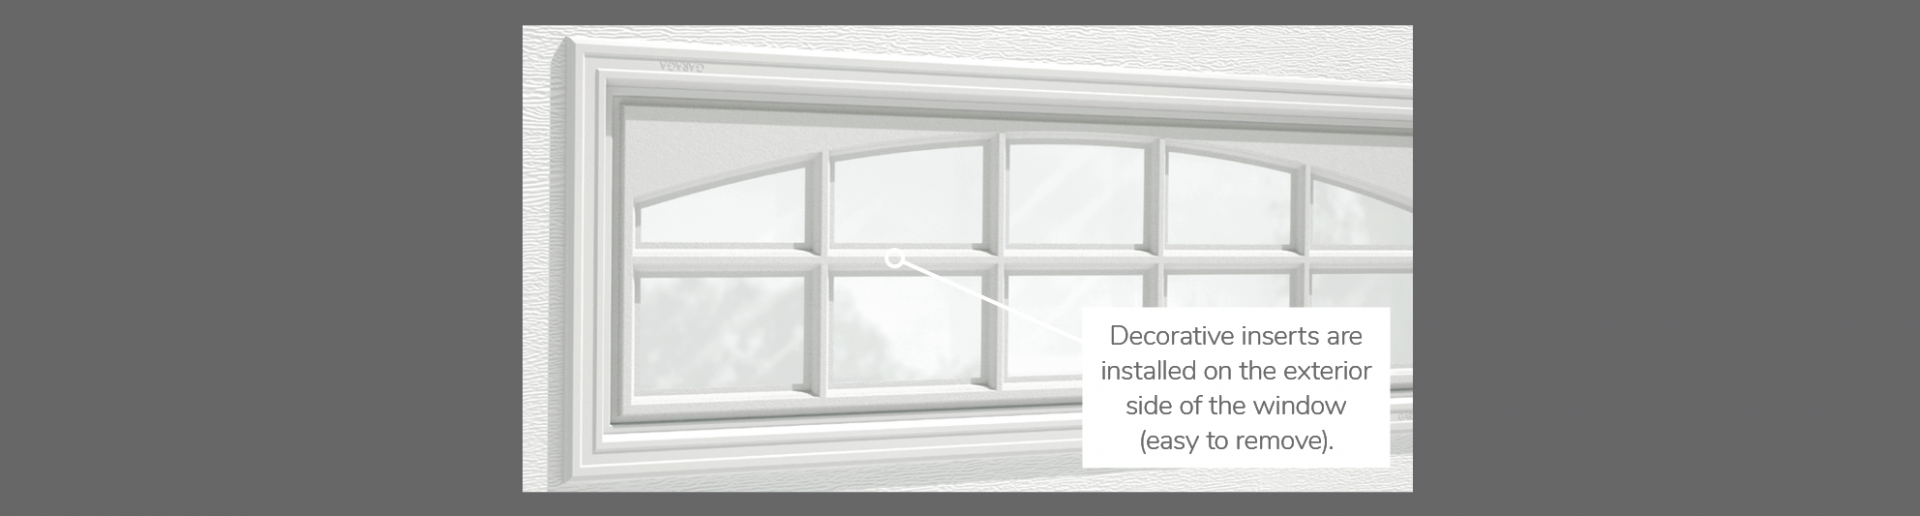 Cascade Decorative Insert, 40" x 13", available for door R-16